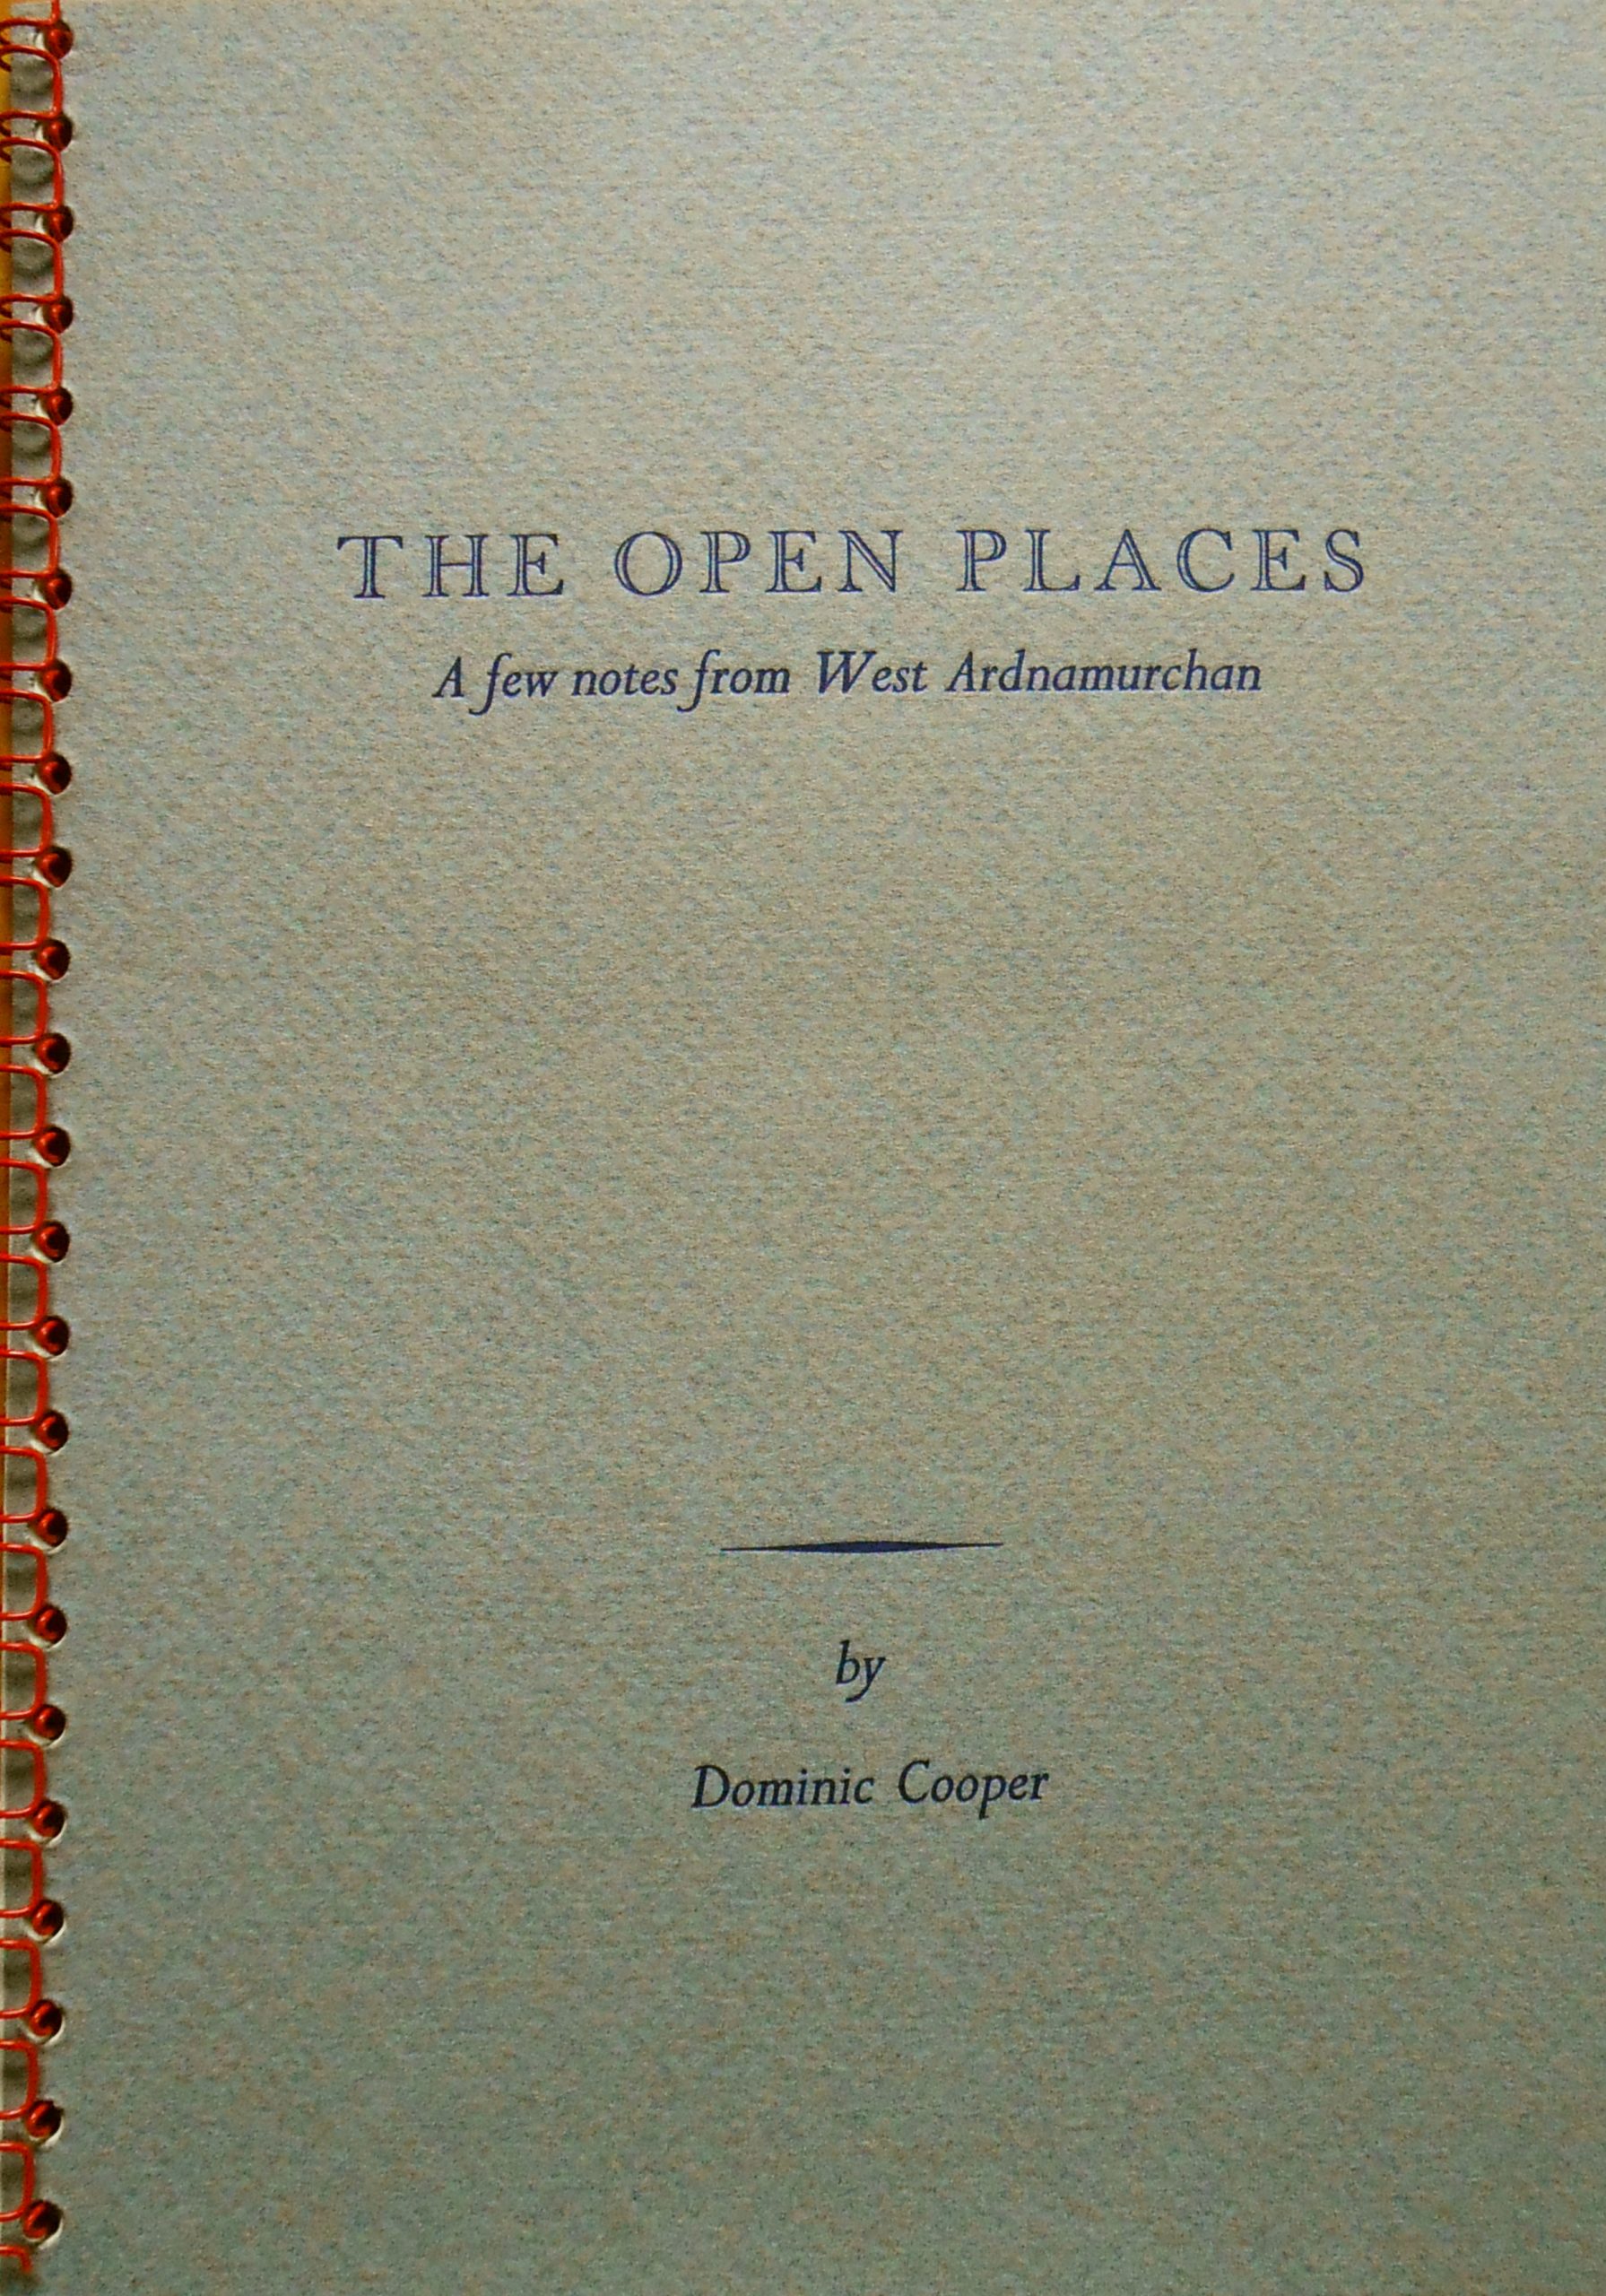 The Open Places